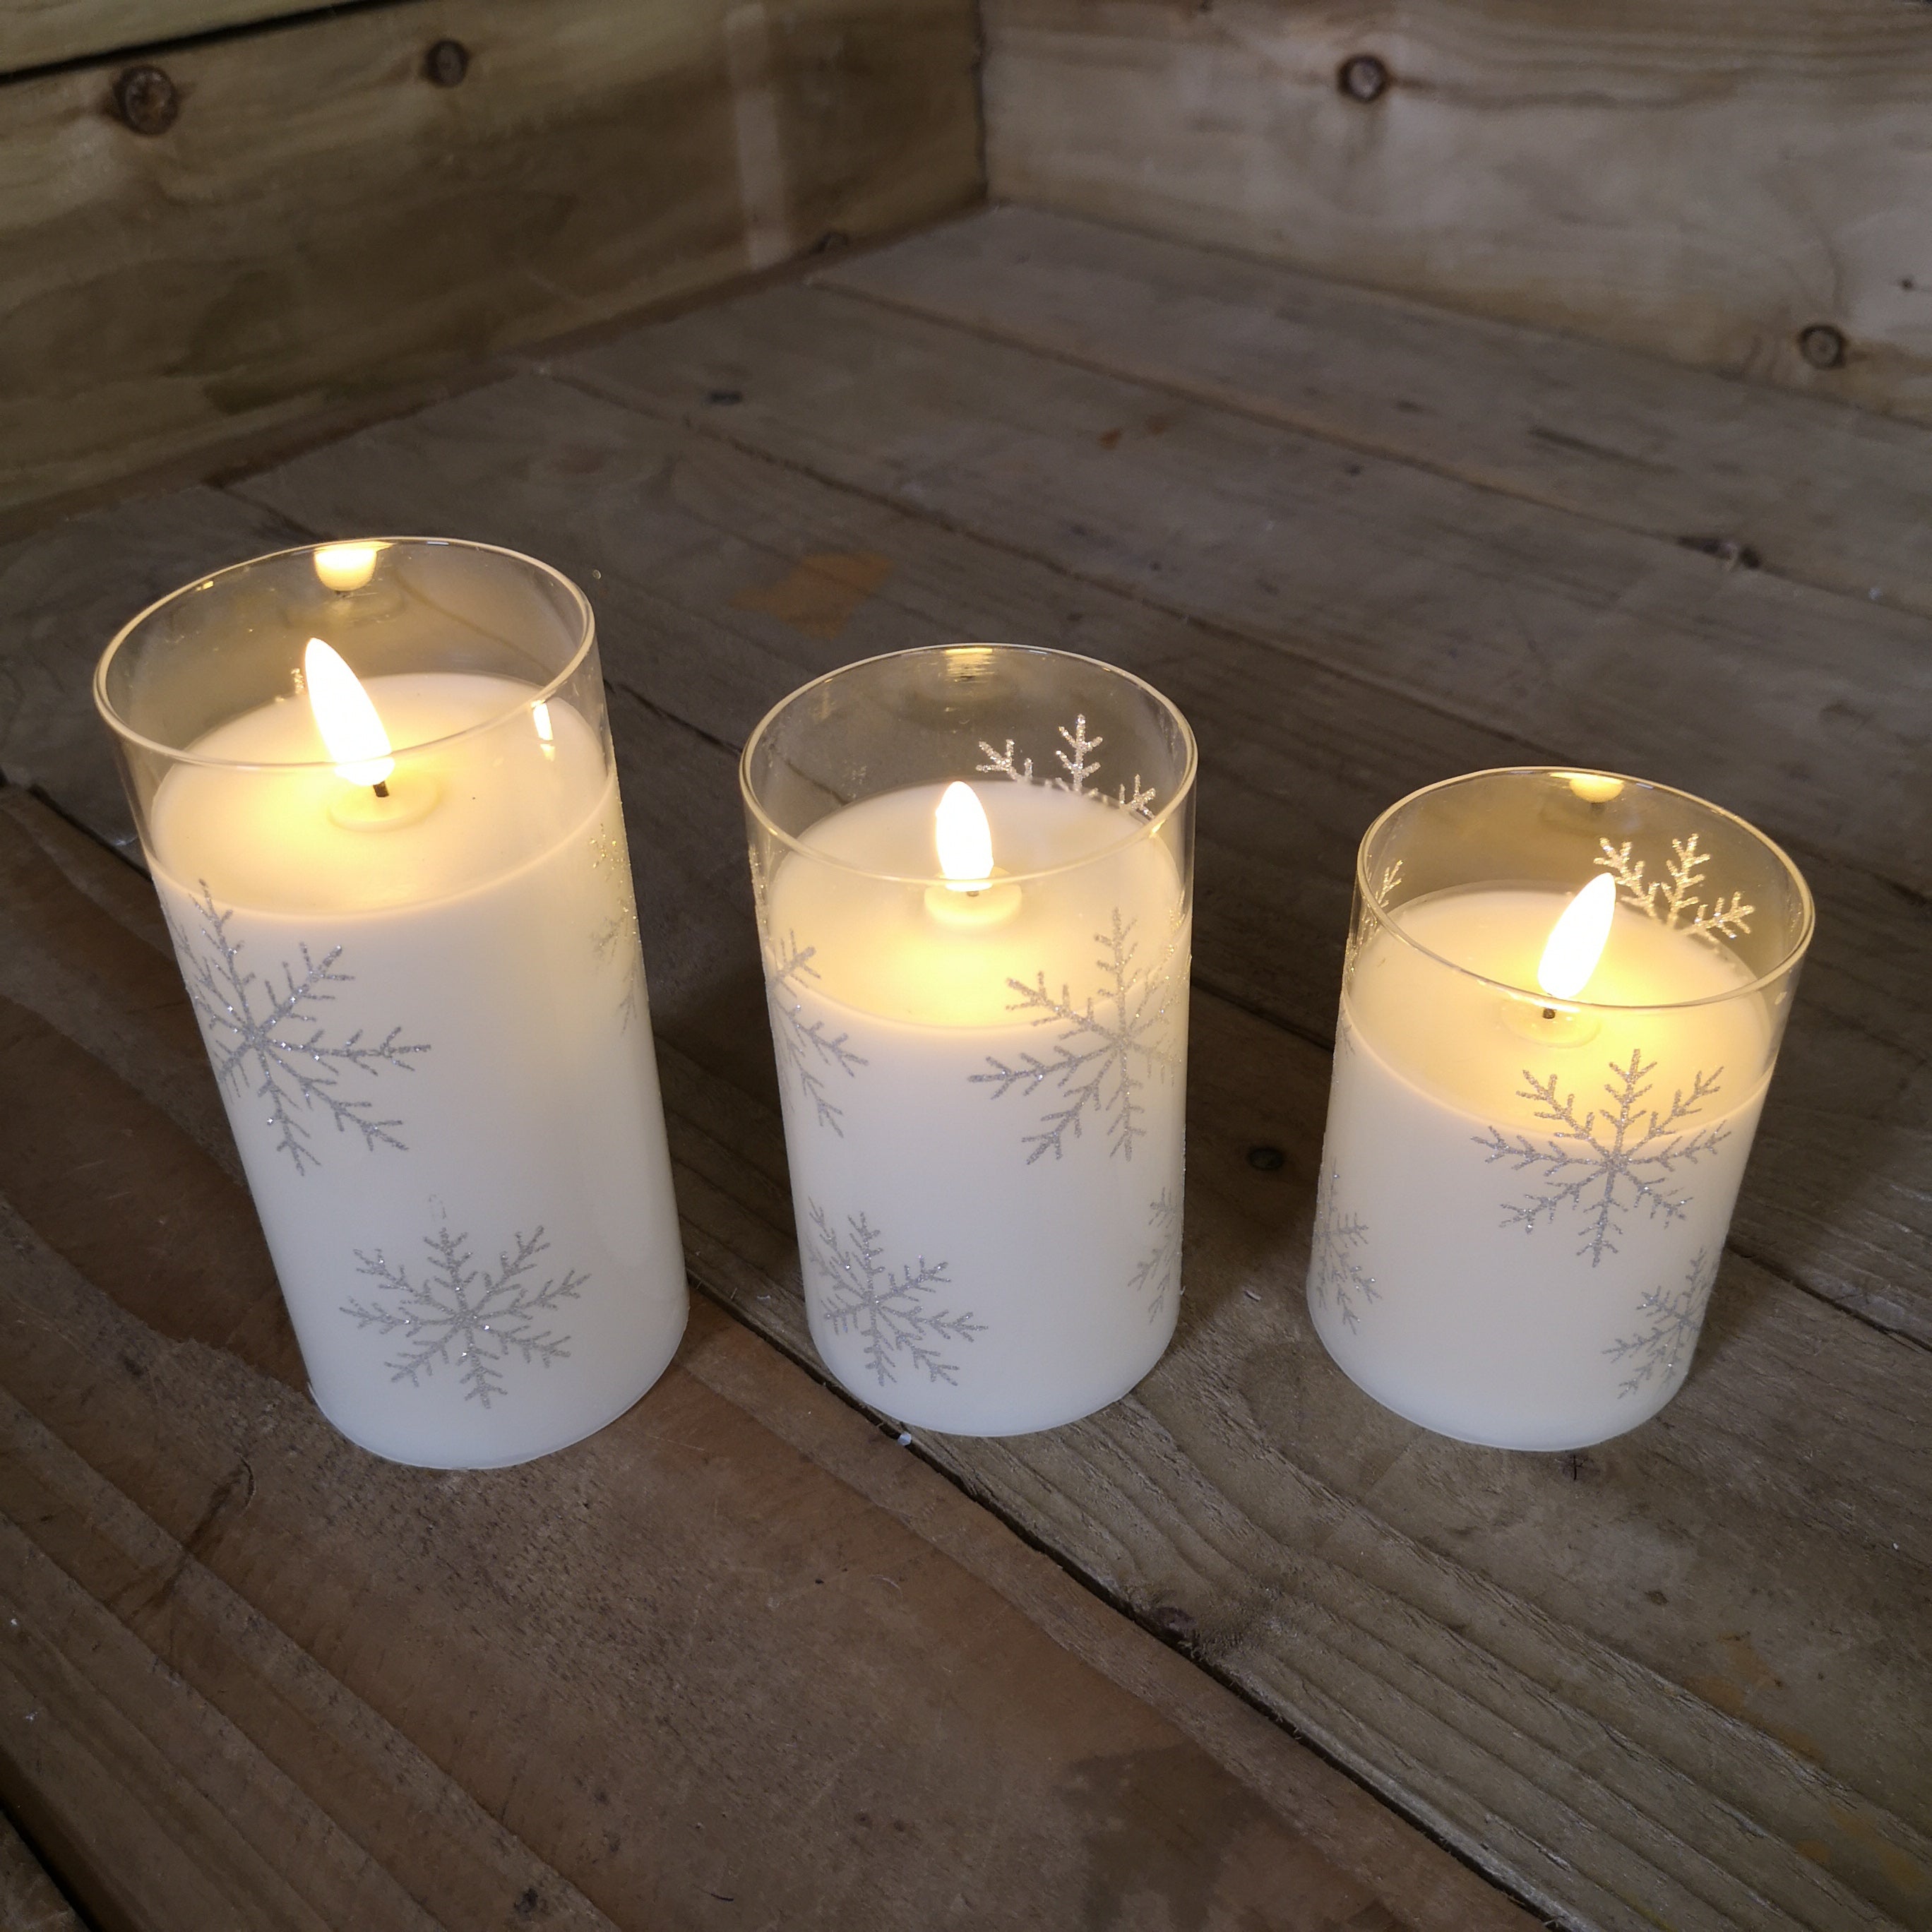 Set of 3 Snowflake Printed Glass Warm White Battery Candles with Timer